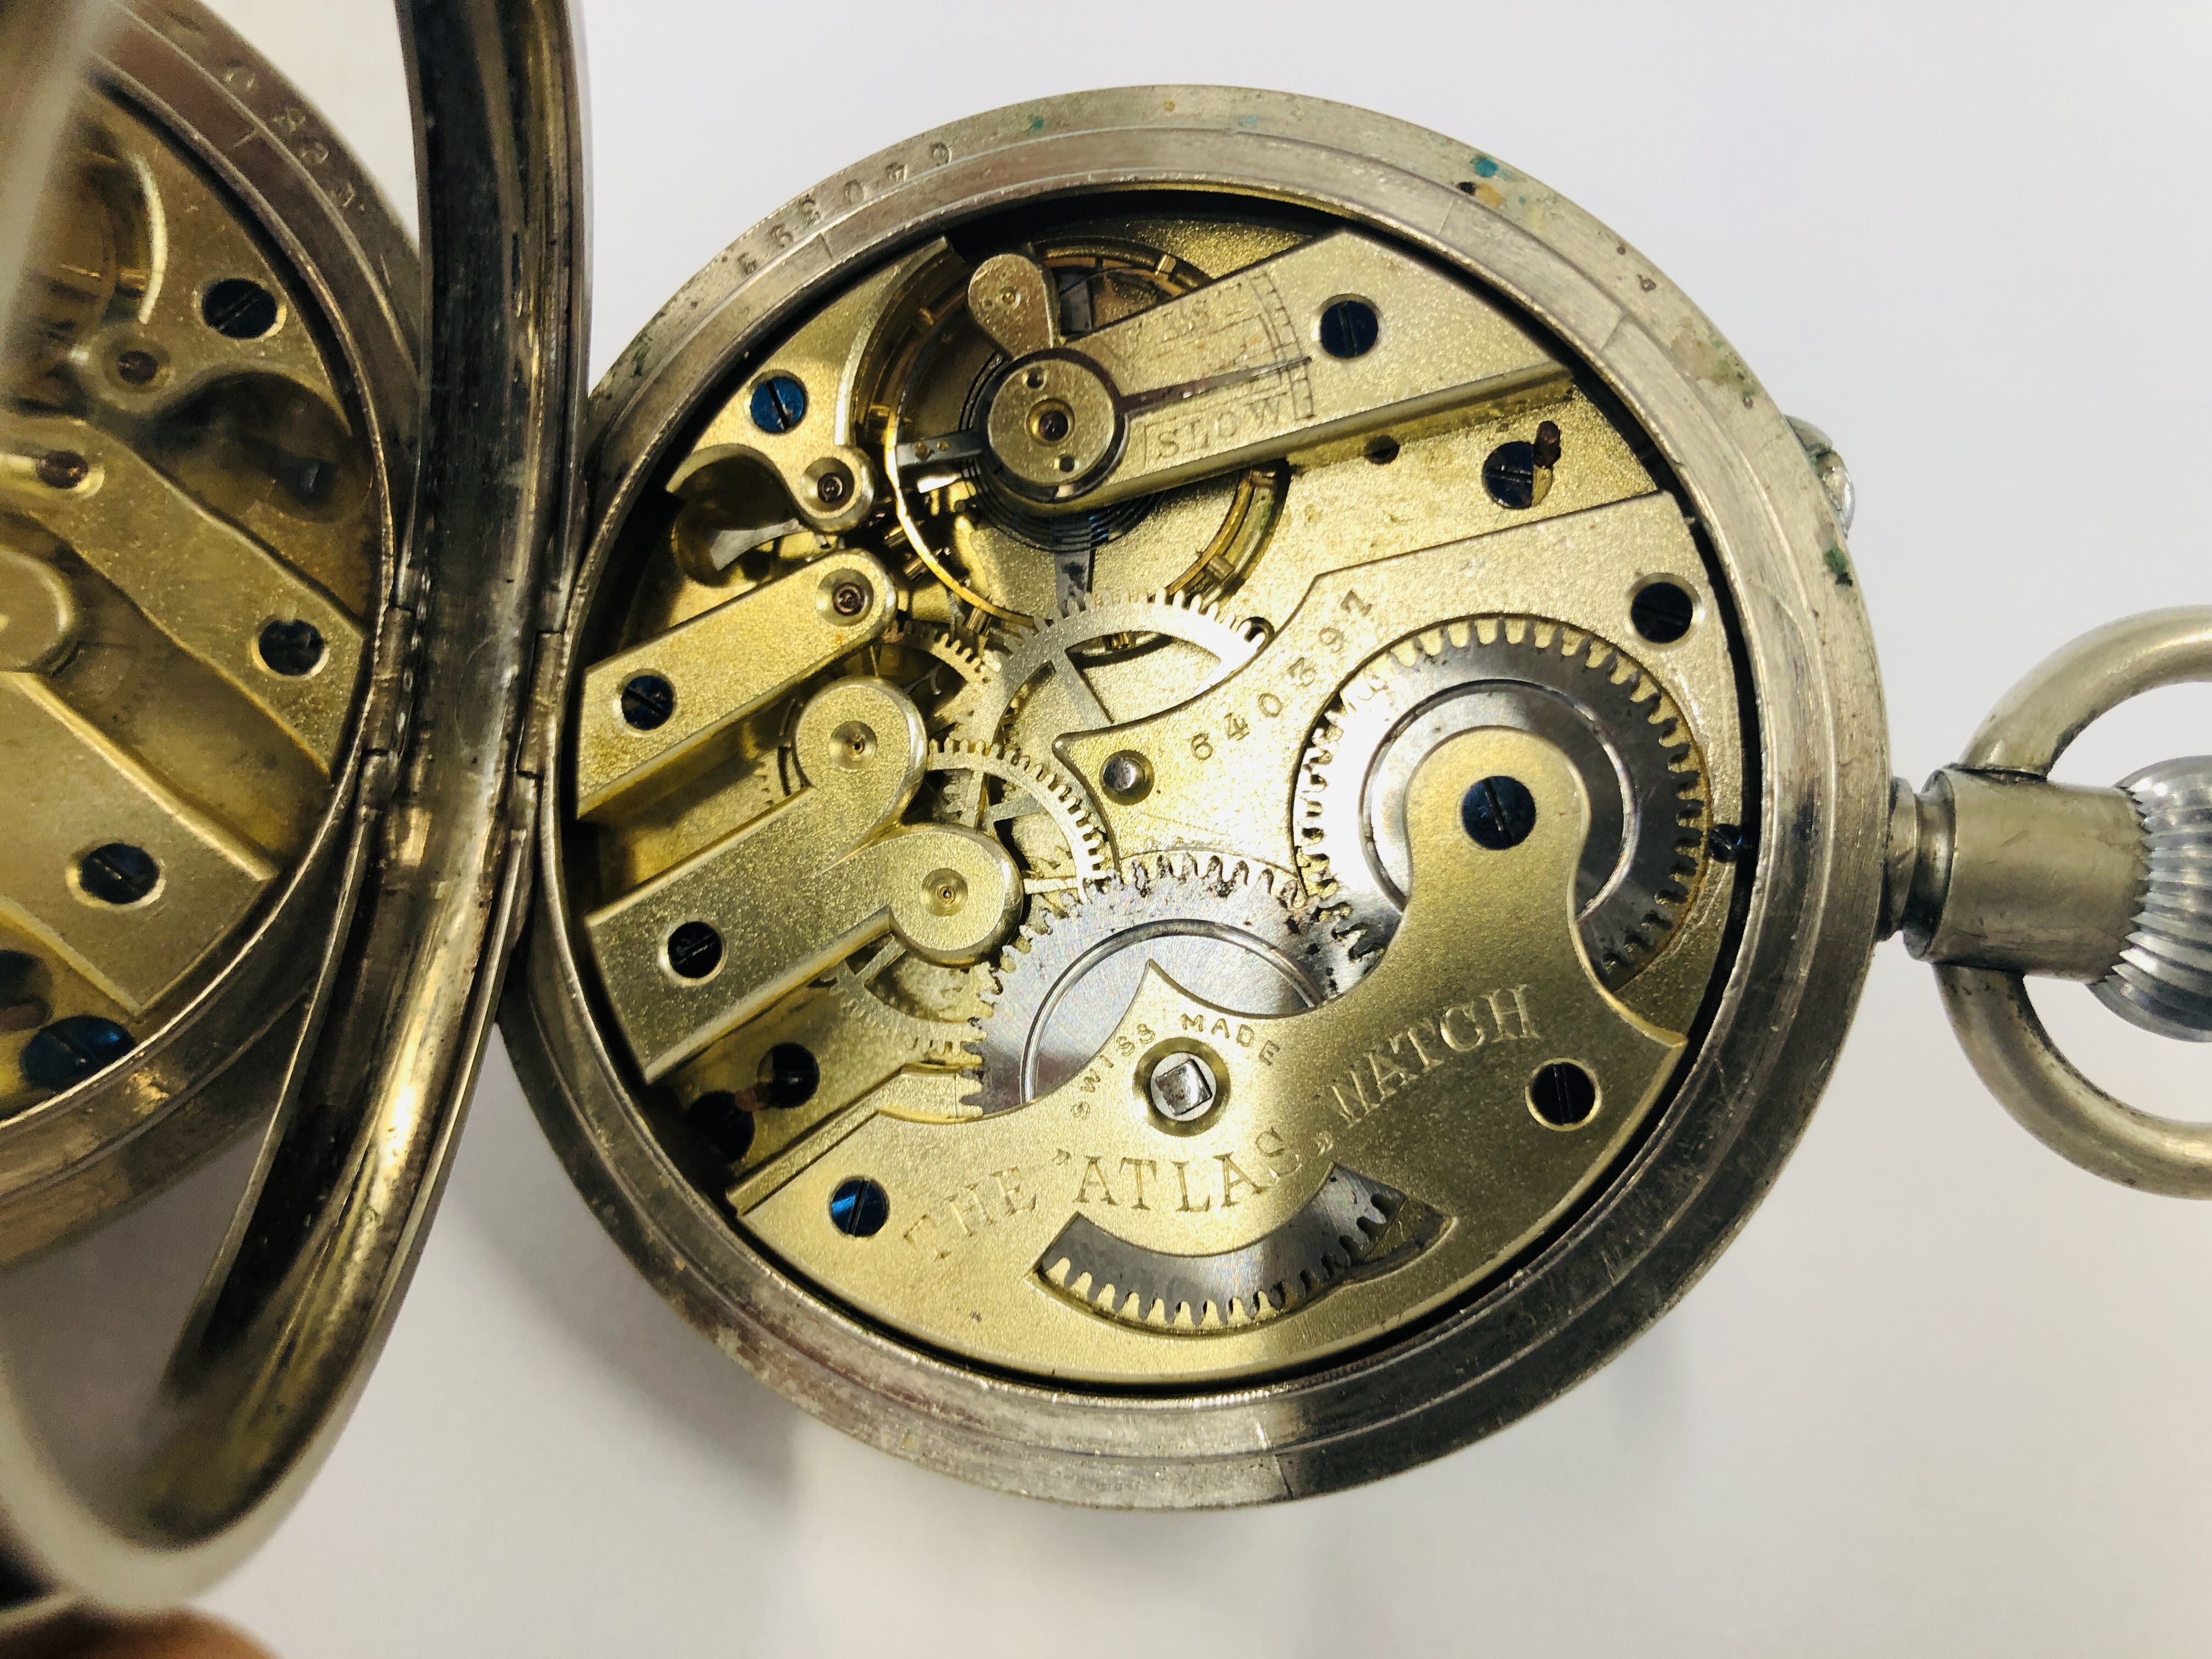 A LARGE STEEL CASED "THE ATLAS WATCH" POCKET WATCH. - Image 6 of 6